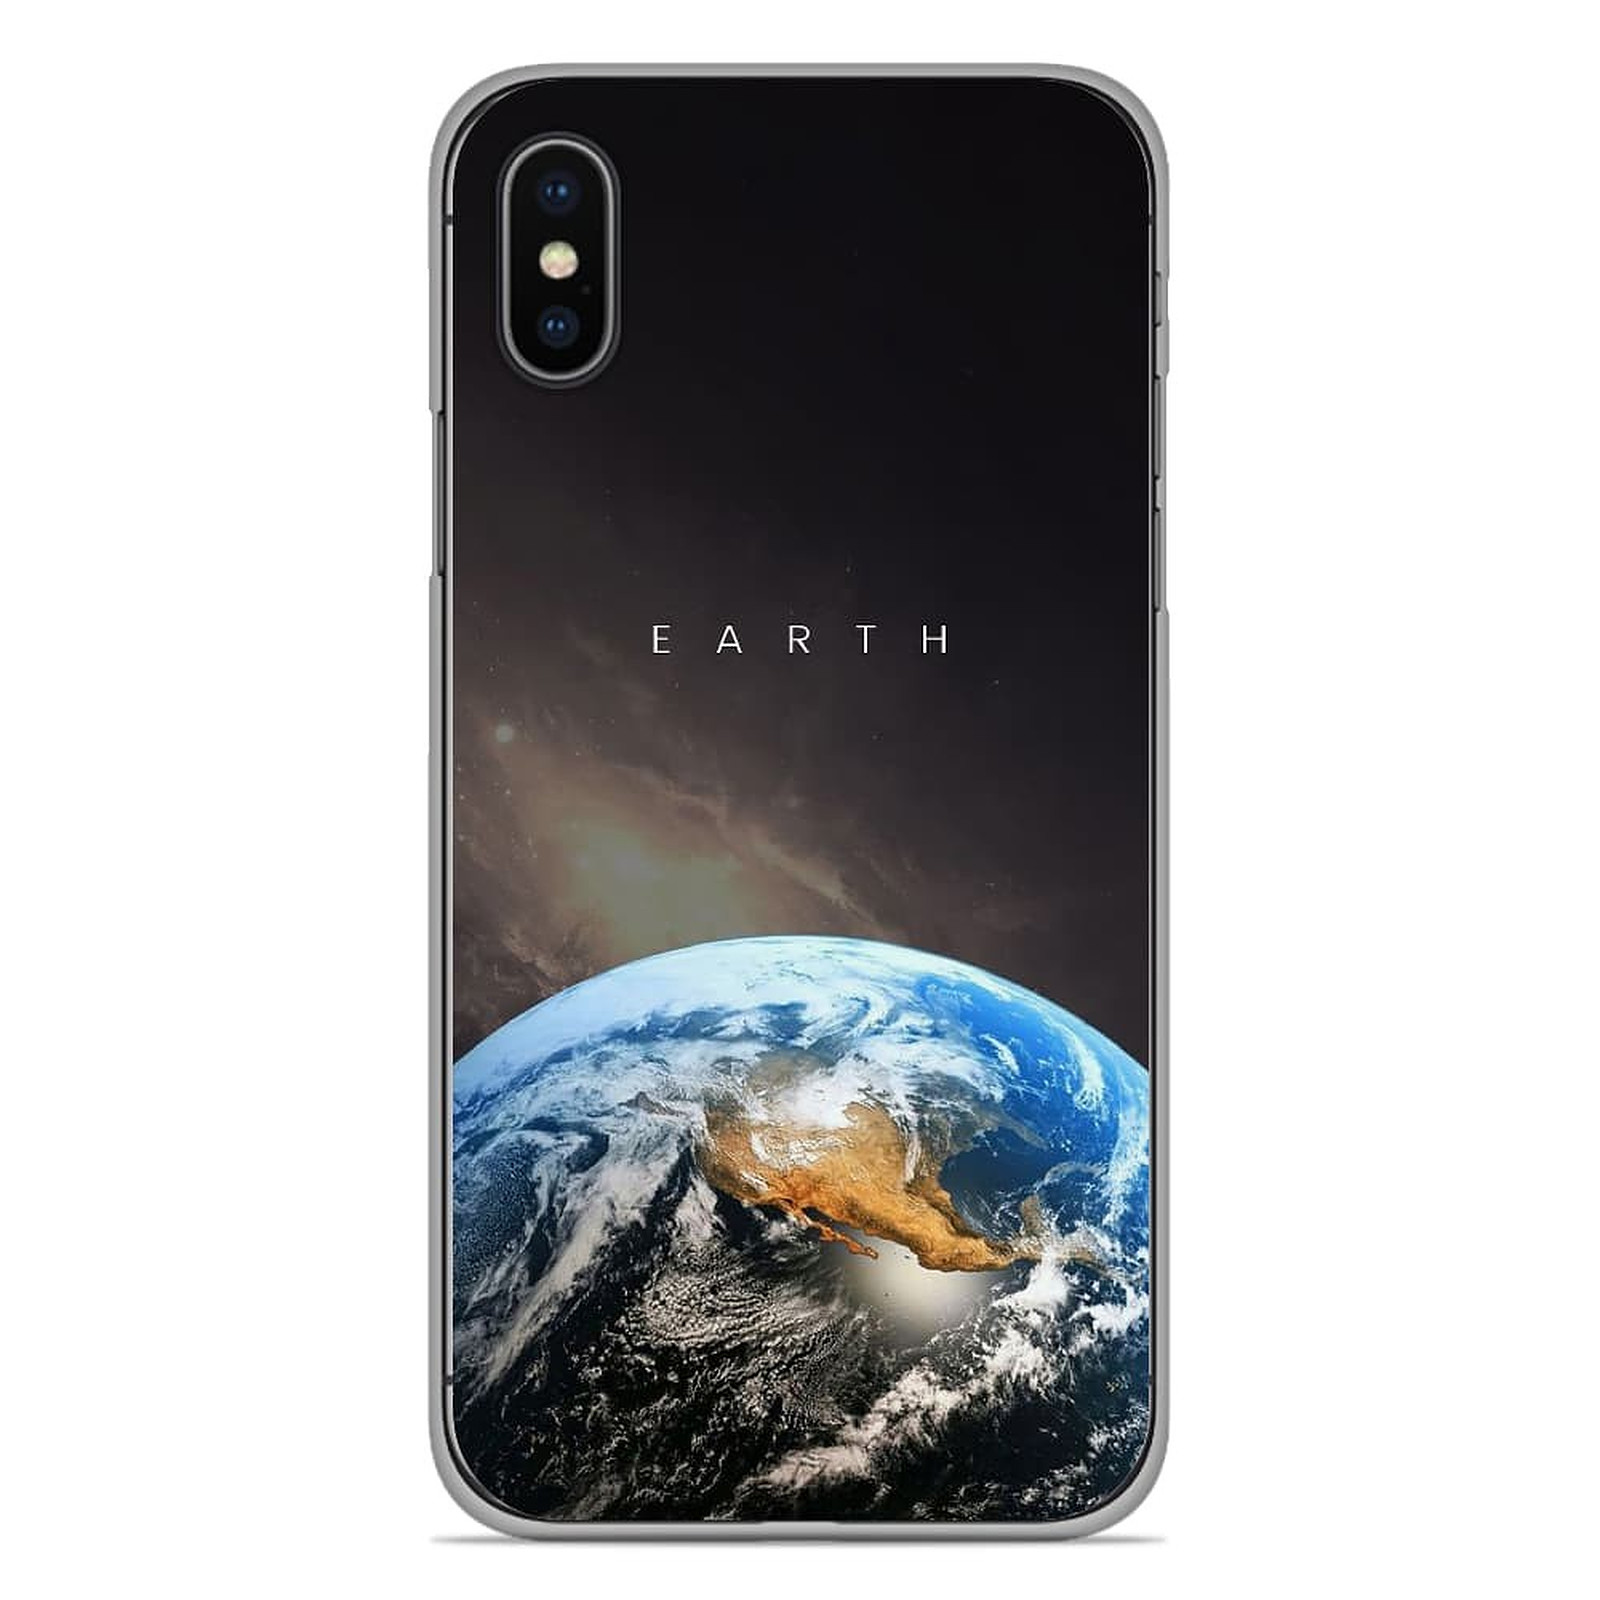 1001 Coques Coque silicone gel Apple iPhone XS Max motif Earth - Coque telephone 1001Coques